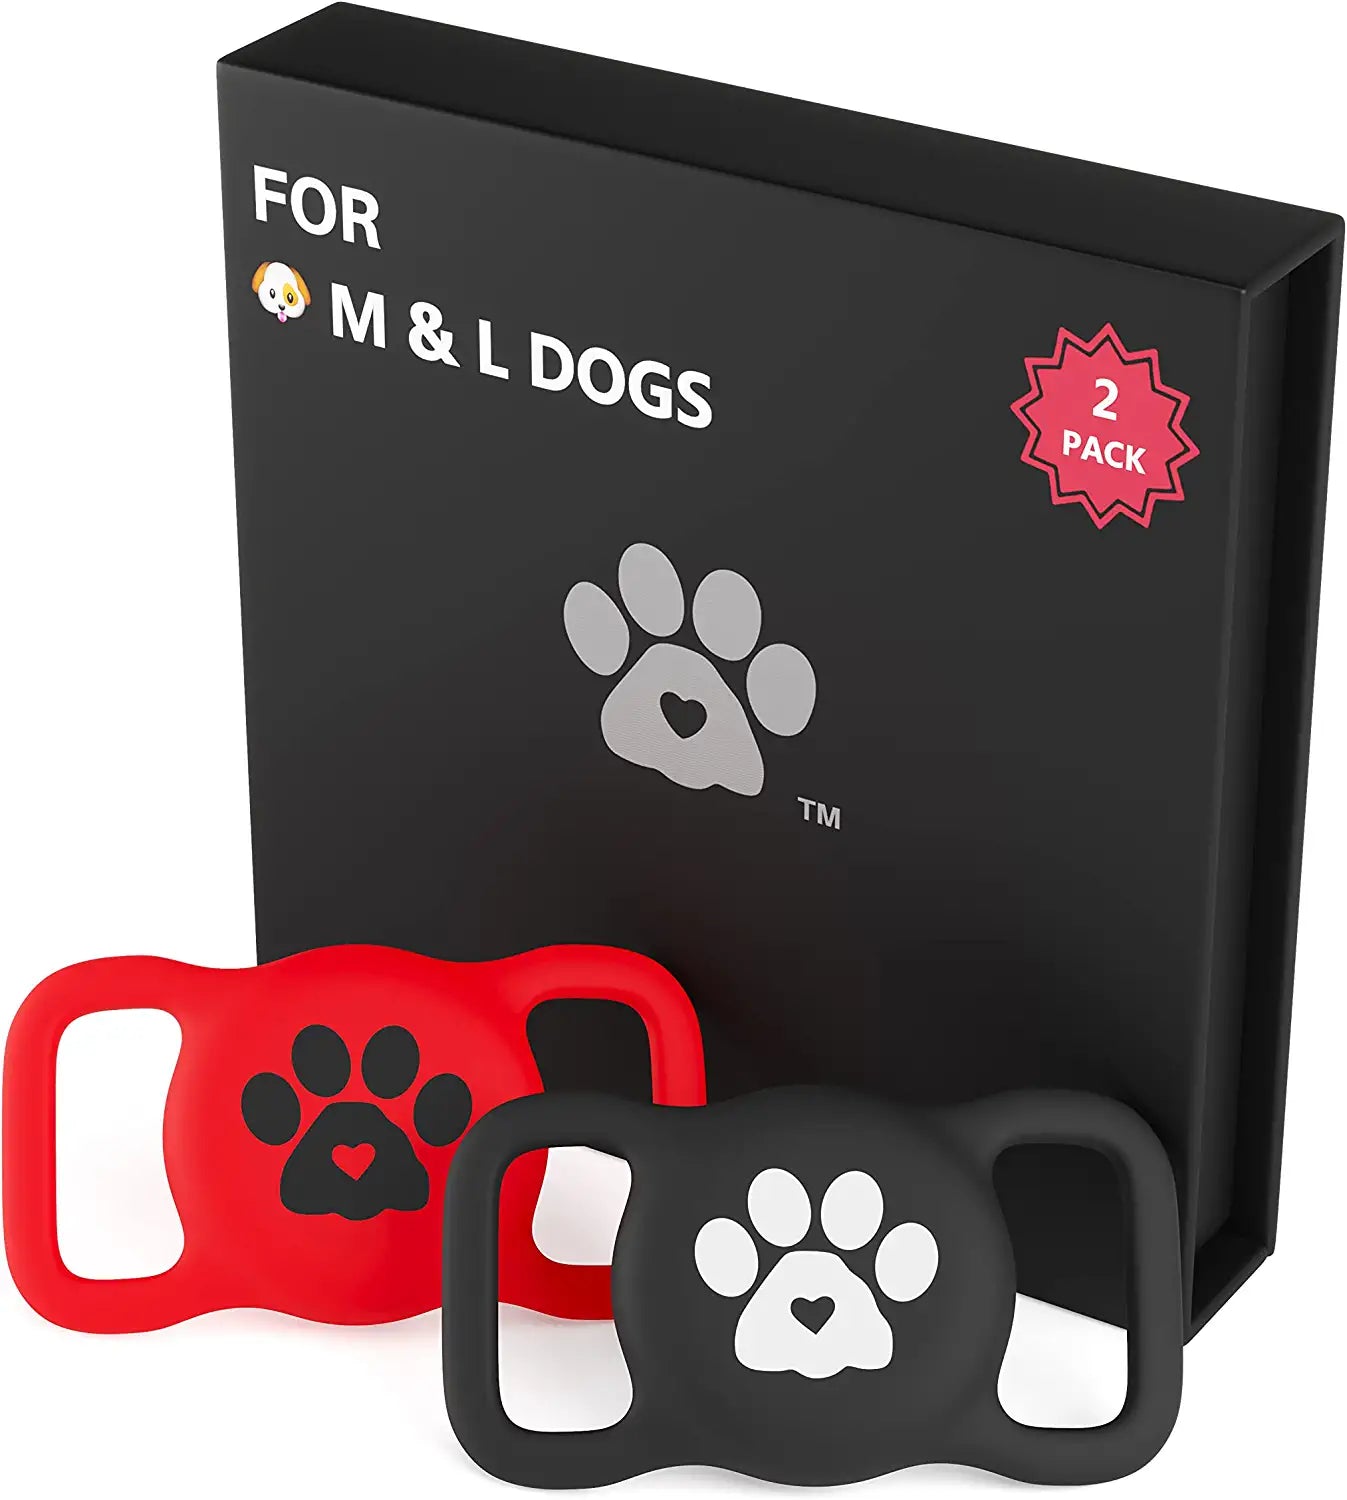 Airtag Dog Collar Holder – Available in Several Colors & Sizes - 2 Pack Silicone Dog Airtag Holder - Premium Dog Collar Airtag Holder - Apple Airtag Dog Collar Comfortably Fits Dogs & Cats Too! Electronics > GPS Accessories > GPS Cases LUVKO FAMILY Classic- M & L Dog, Black & Red  